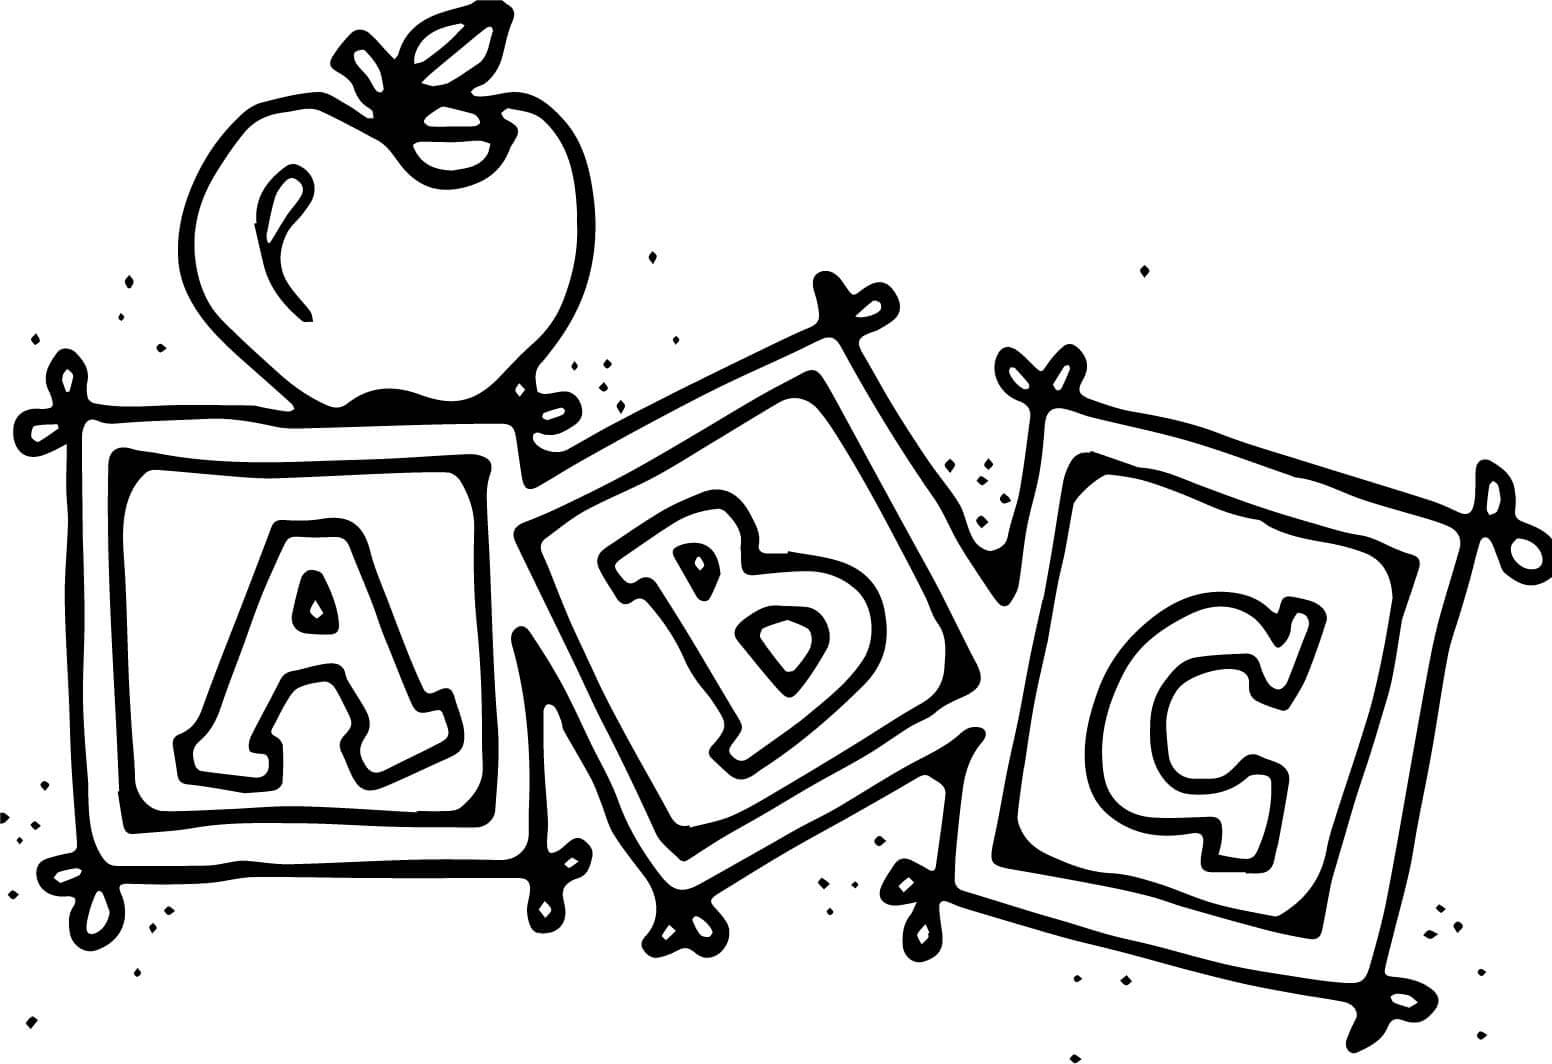 ABC School Coloring Page for Kindergarten